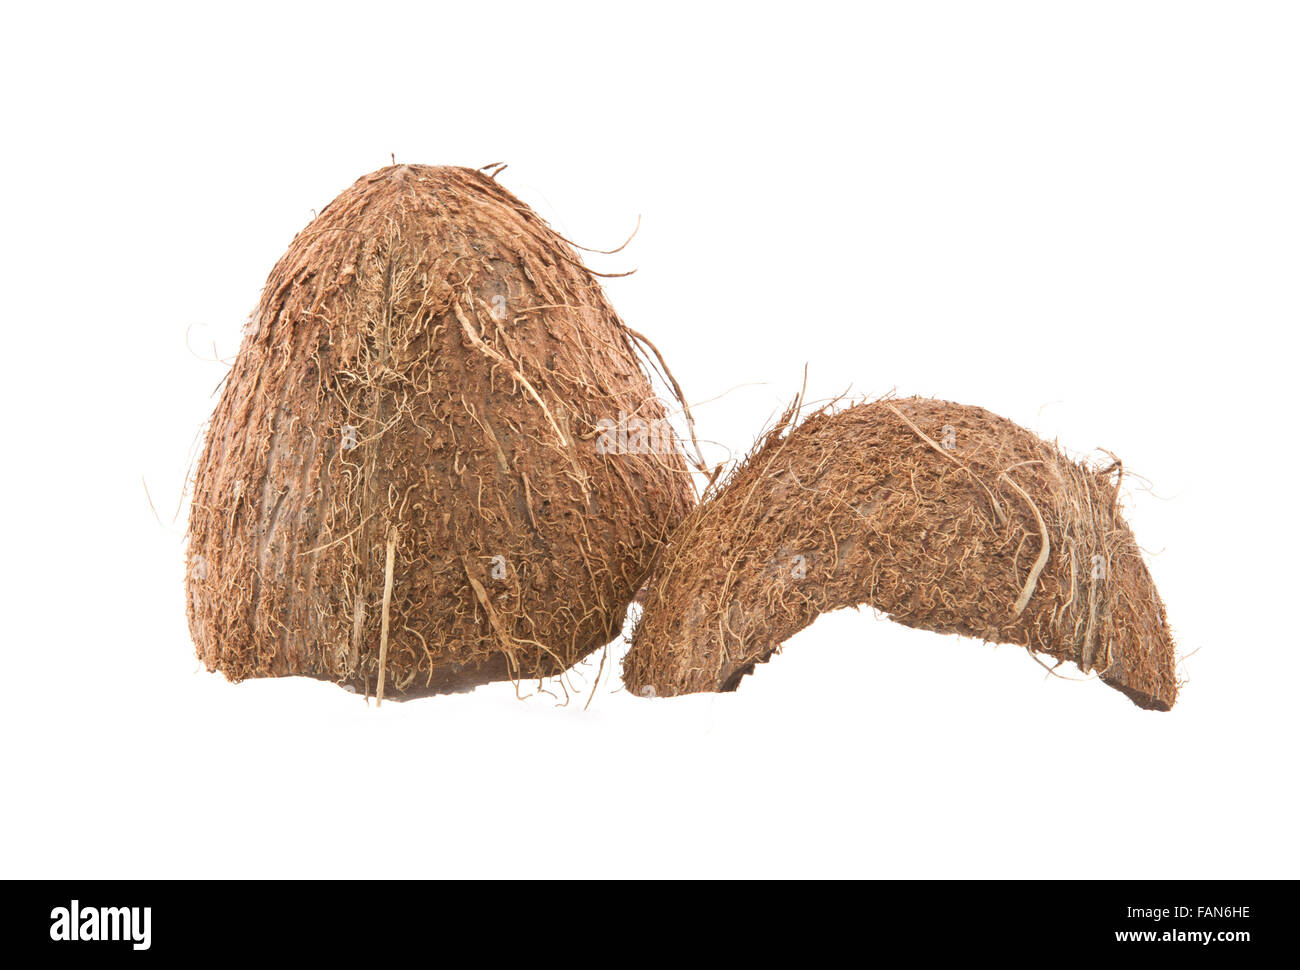 Coconut shell on a white background Stock Photo